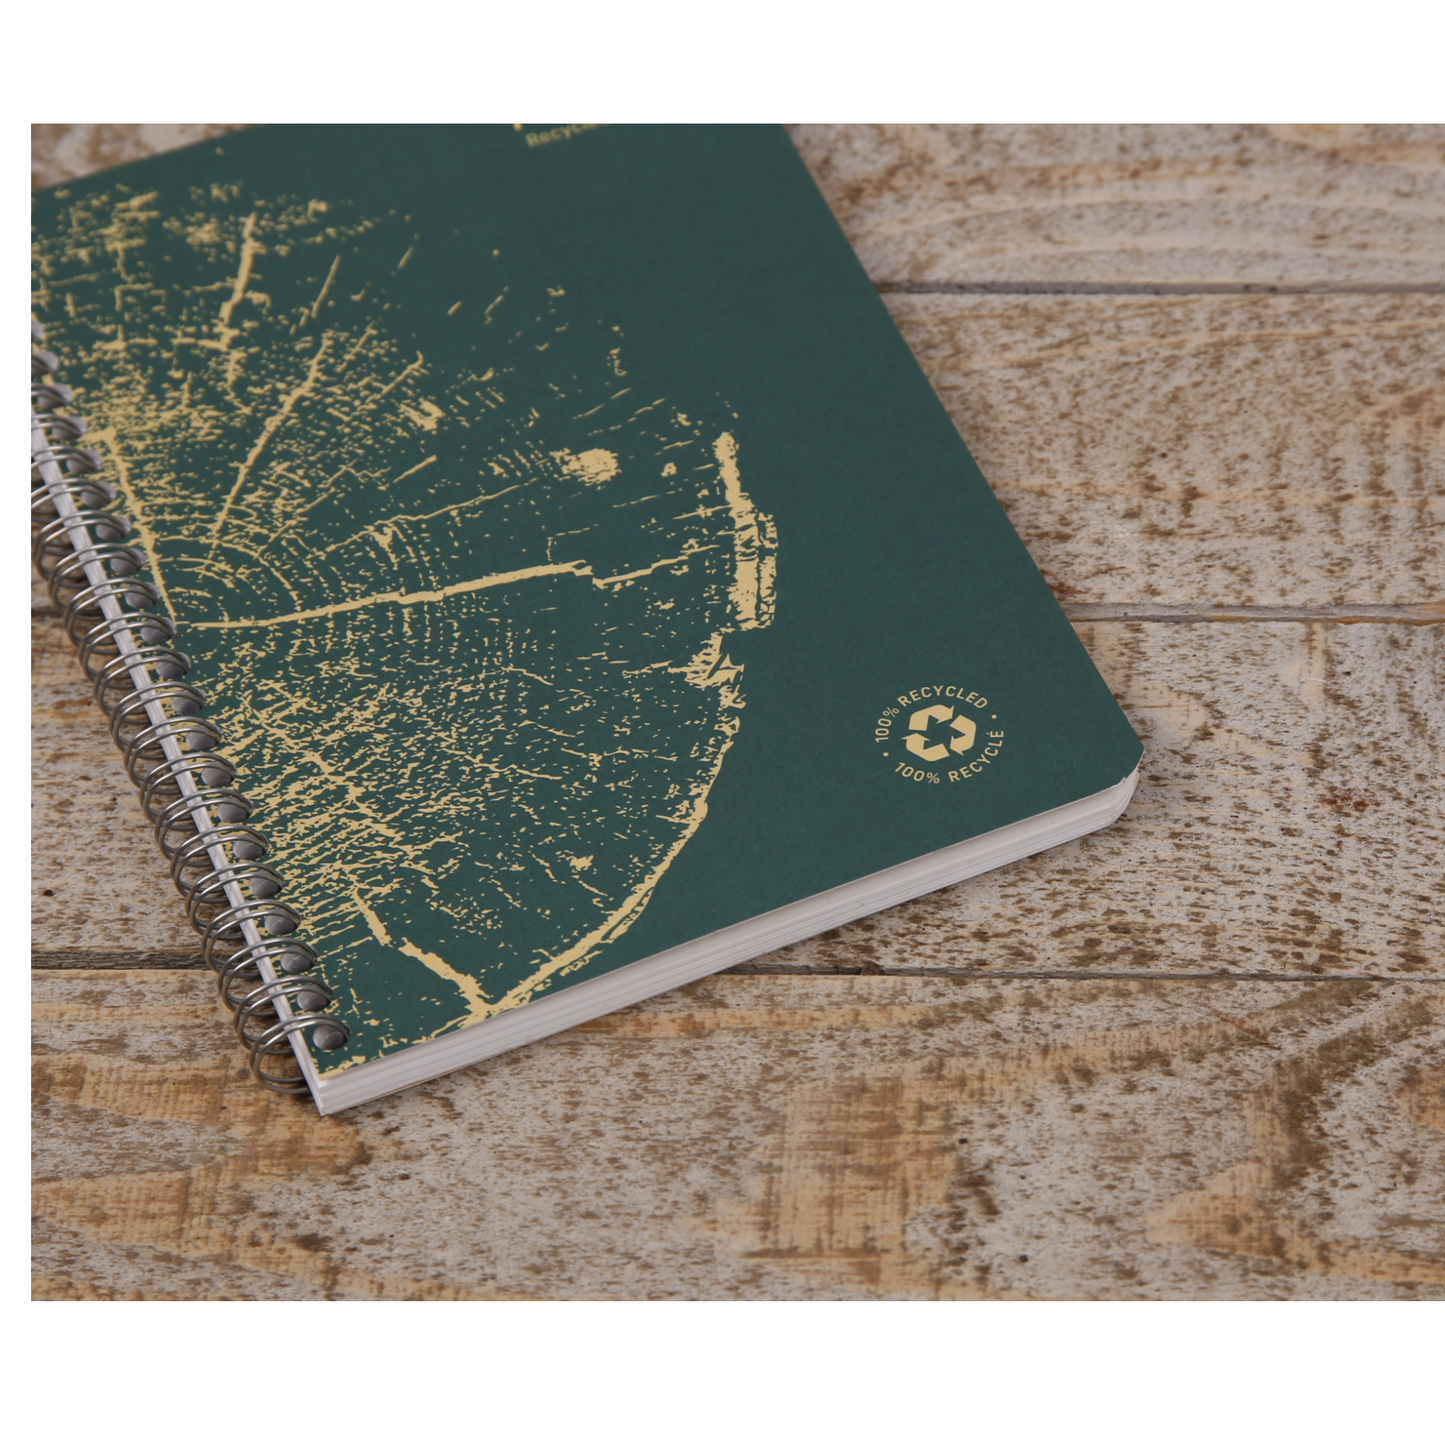 Clairefontaine "Forever" 100% Recycled Notebooks: Staple Spine - Grey